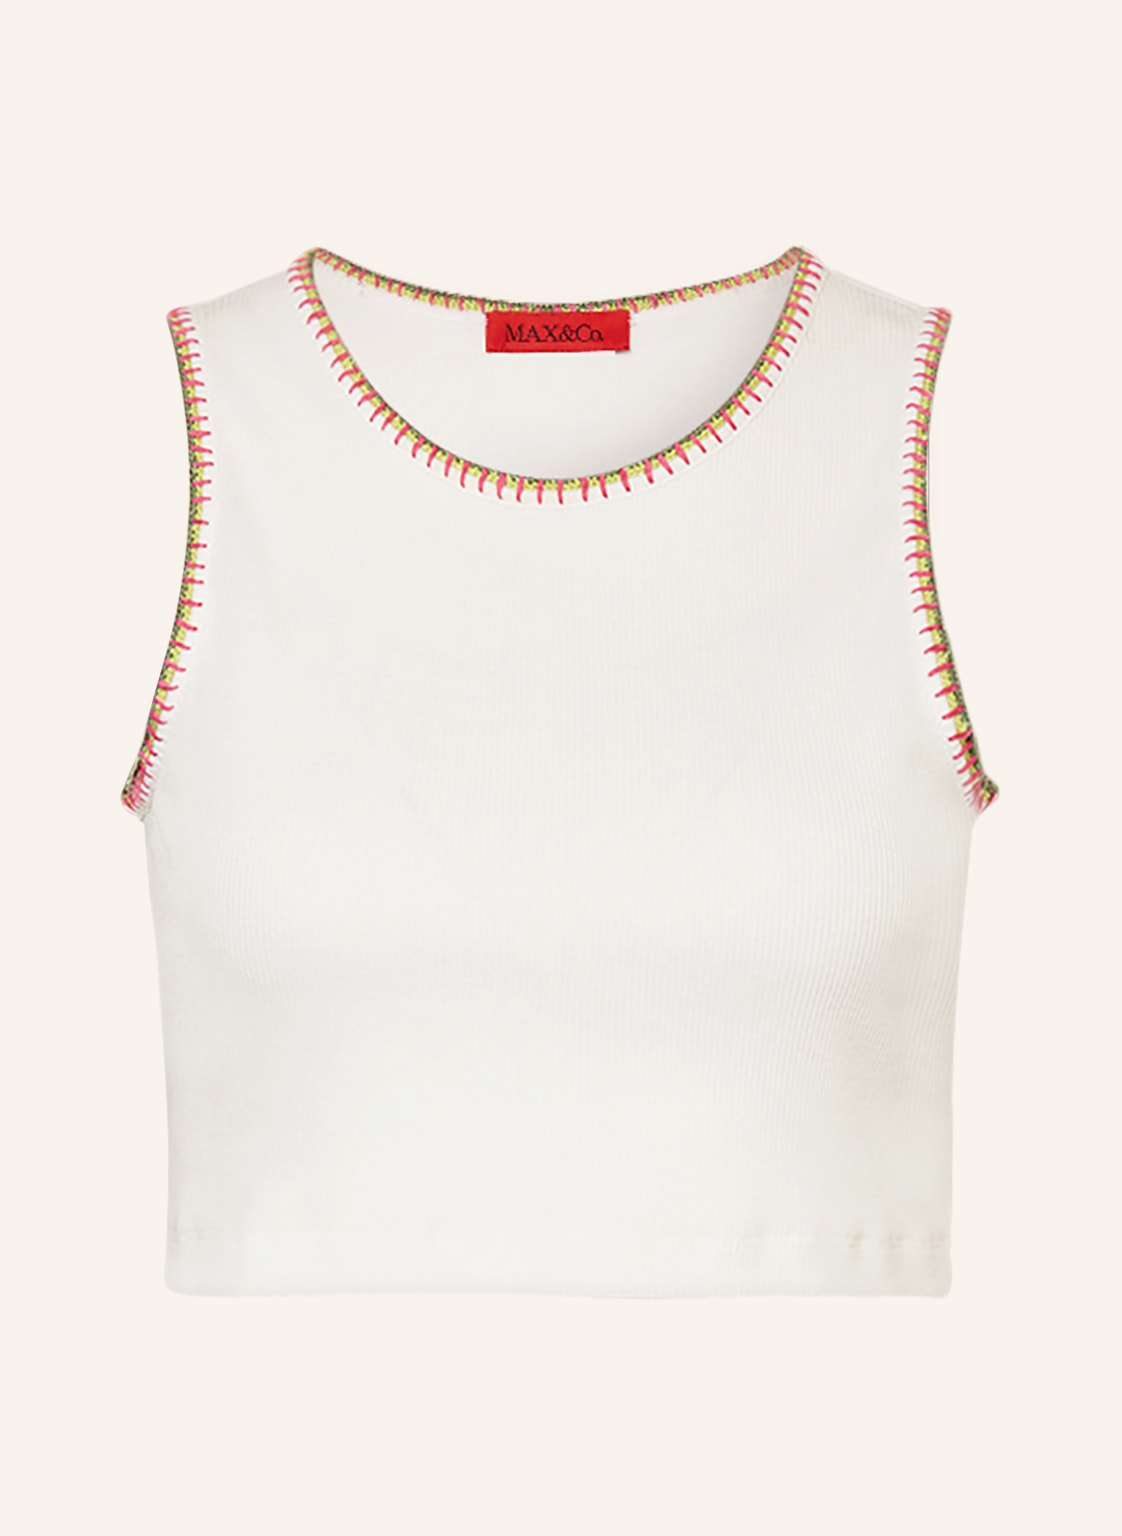 Max & Co. Cropped-Top Nazca weiss von MAX & Co.